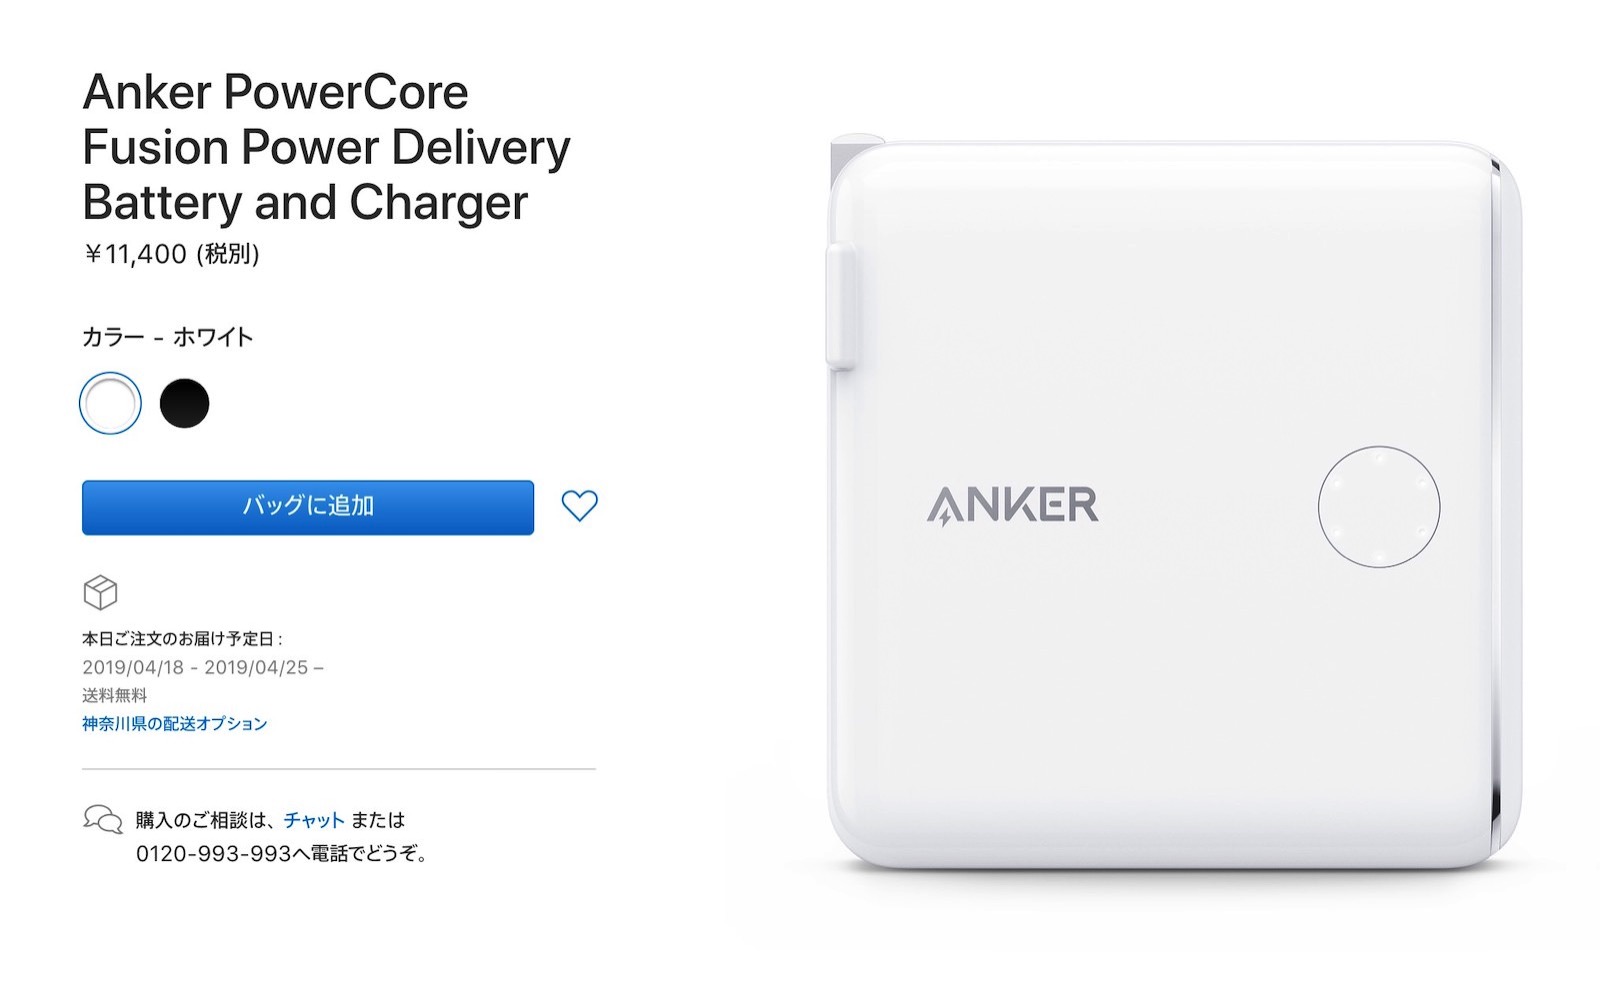 Apple-PowerCore-Fusion-Power-Delivery-Battery-and-Charger.jpg